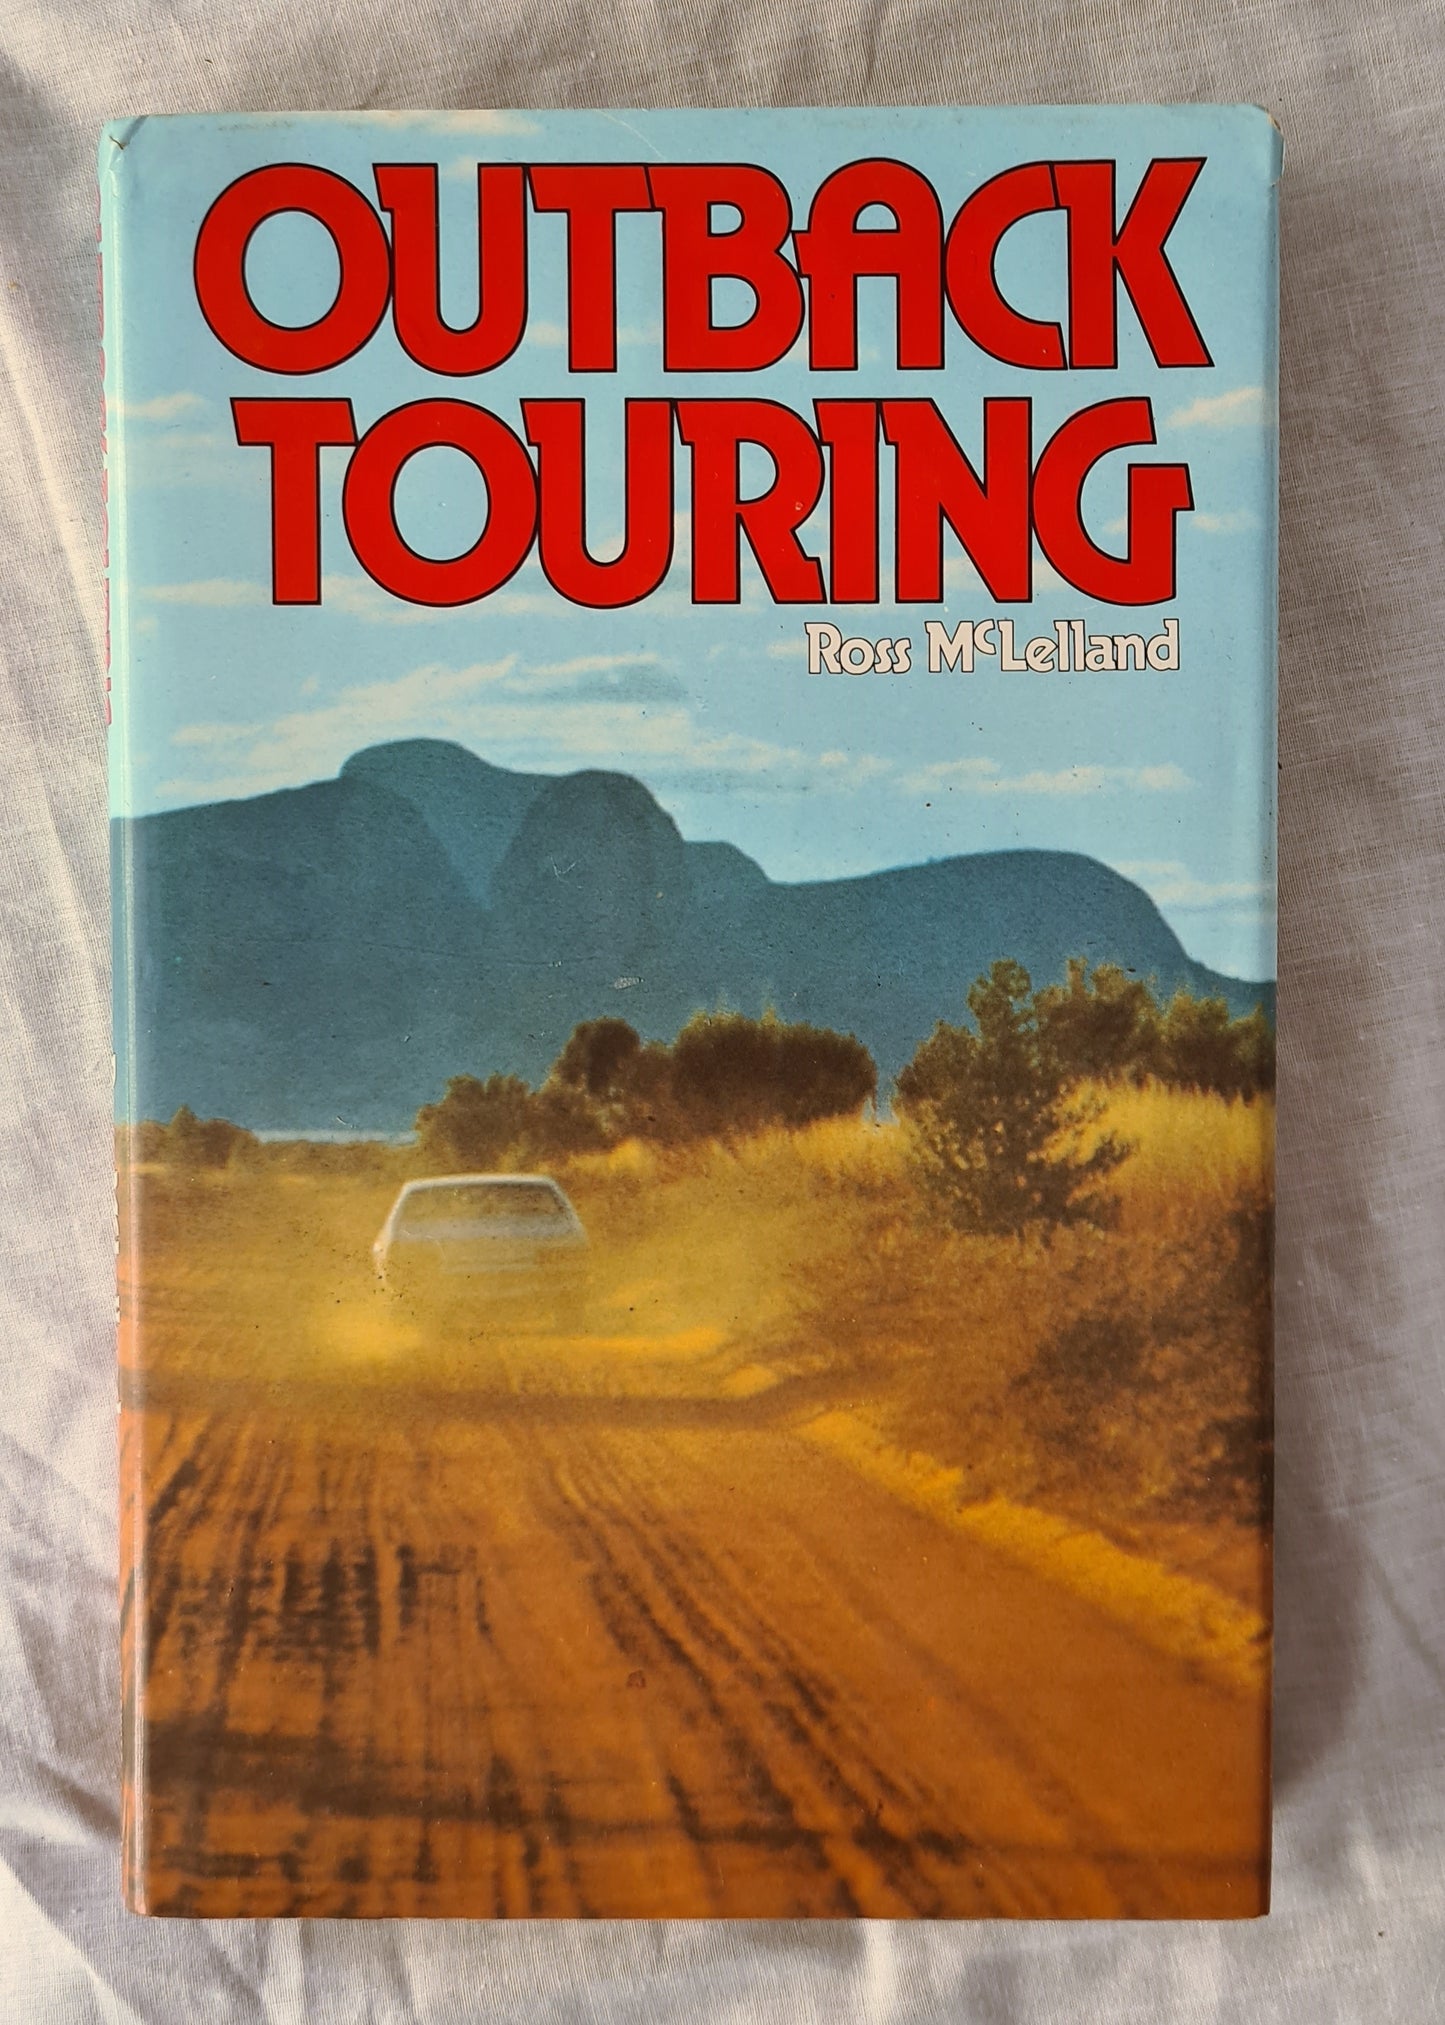 Outback Touring by Ross McLelland